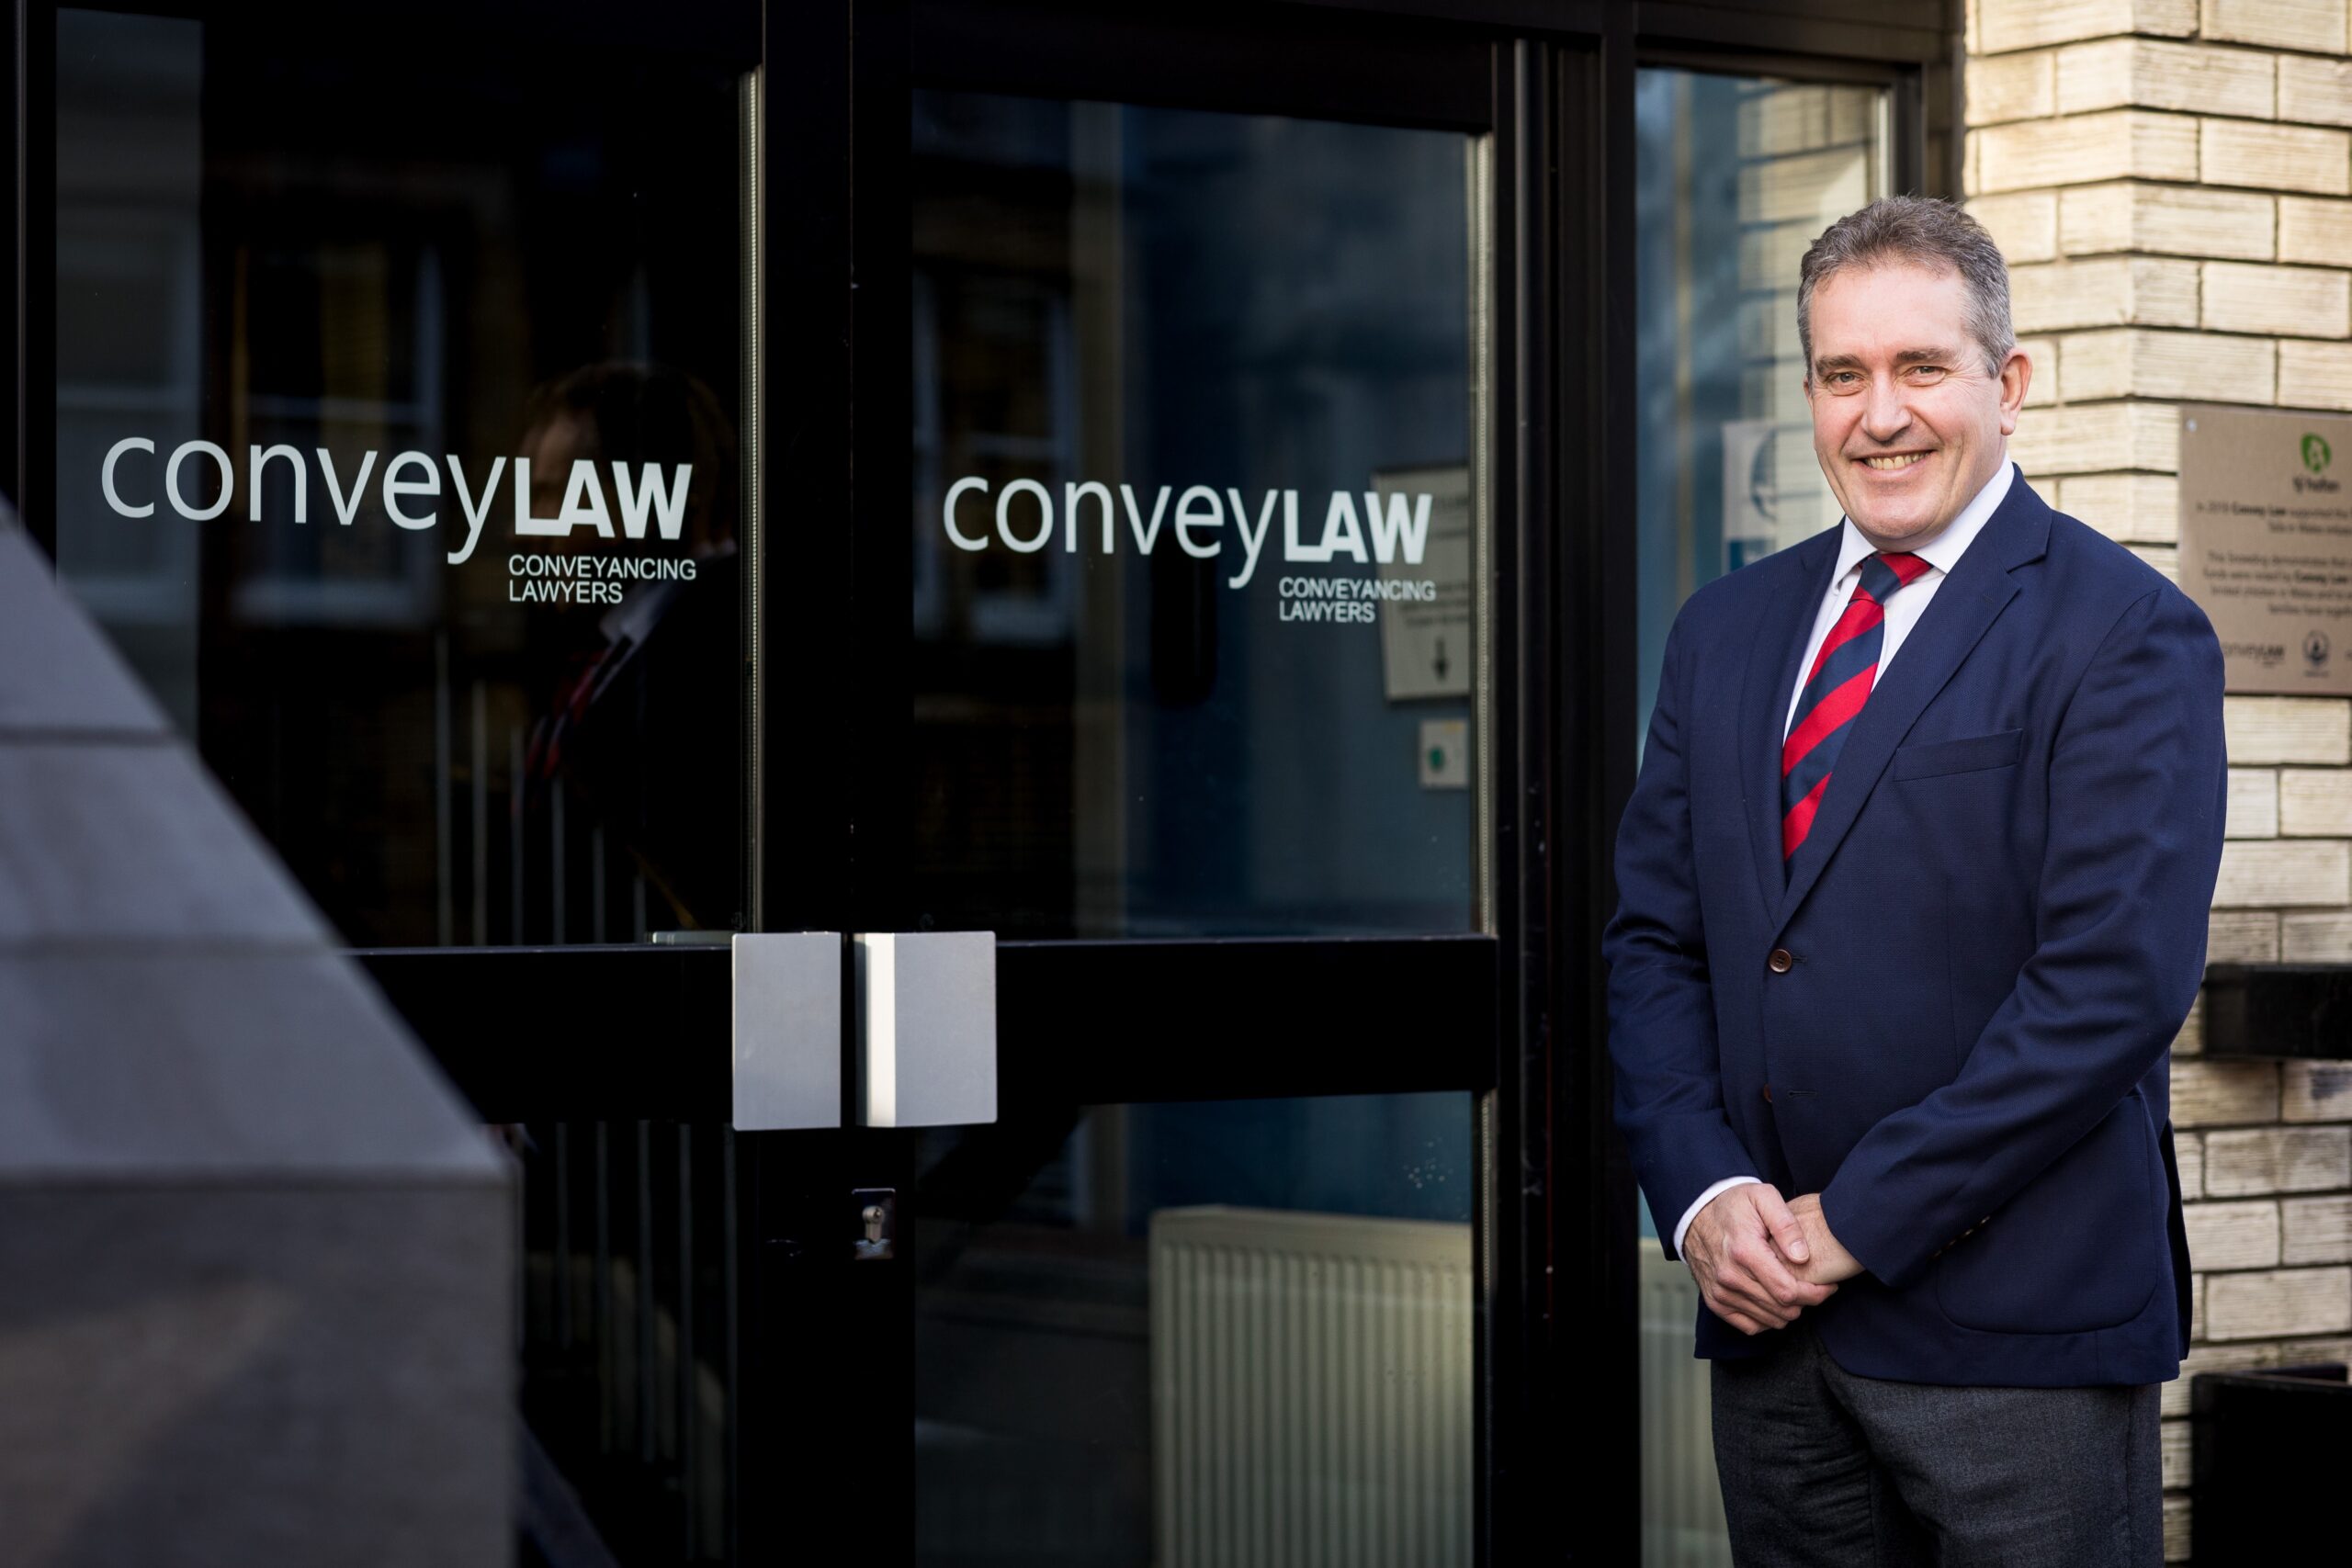 Relations between conveyancers and estate agents improve while clients become more demanding, says Conveyancing Foundation chairman